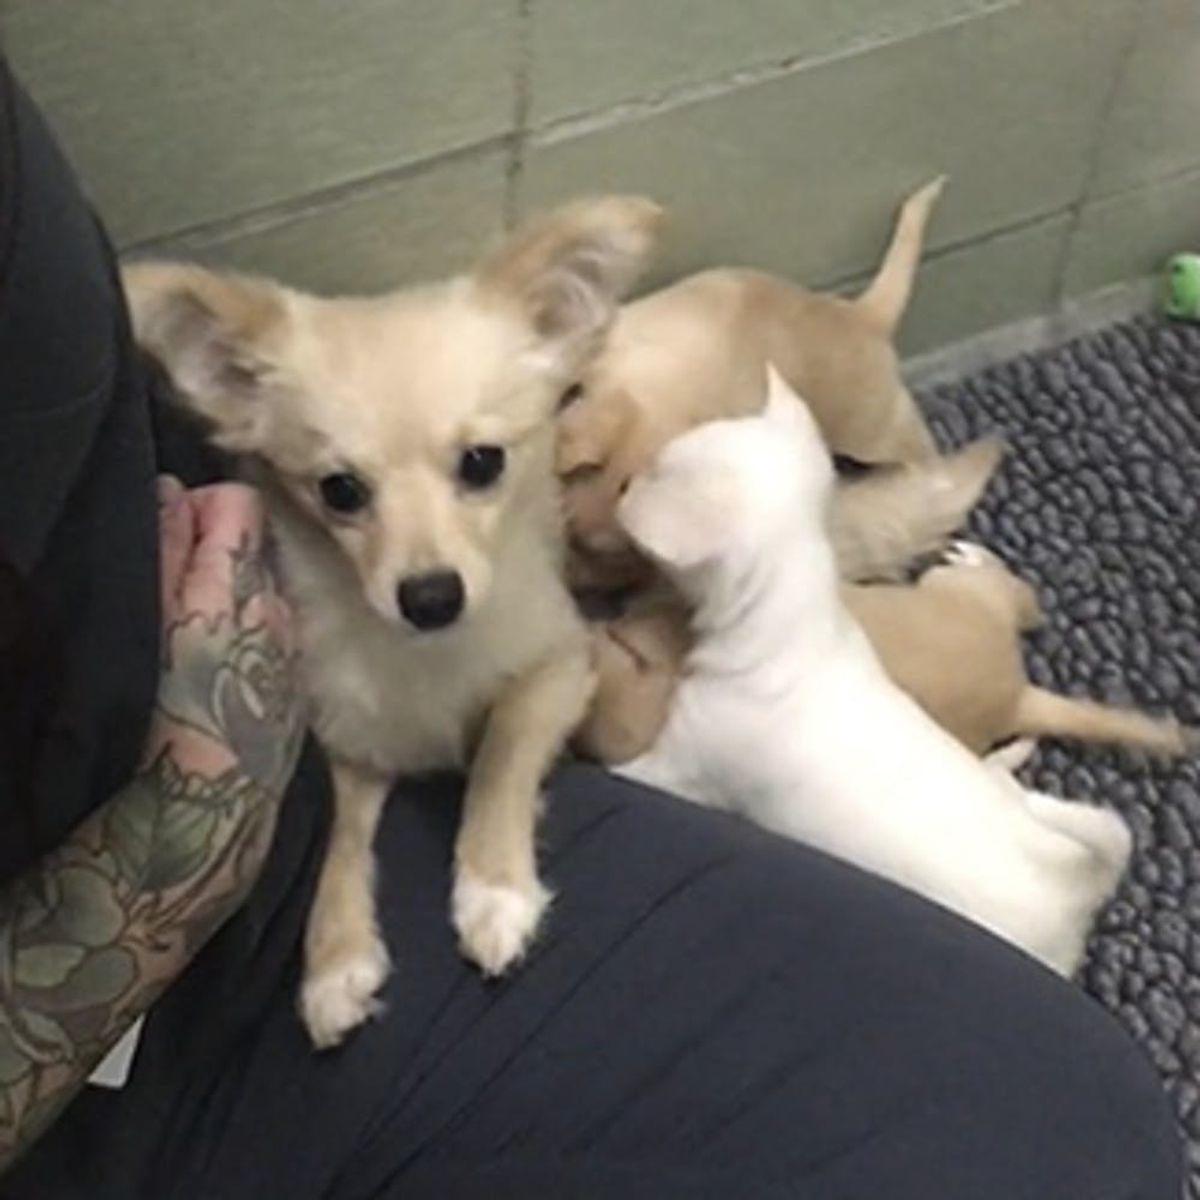 This Amazing Vid of a Shelter Dog Reuniting With Her Pups Will Make You Emotional AF